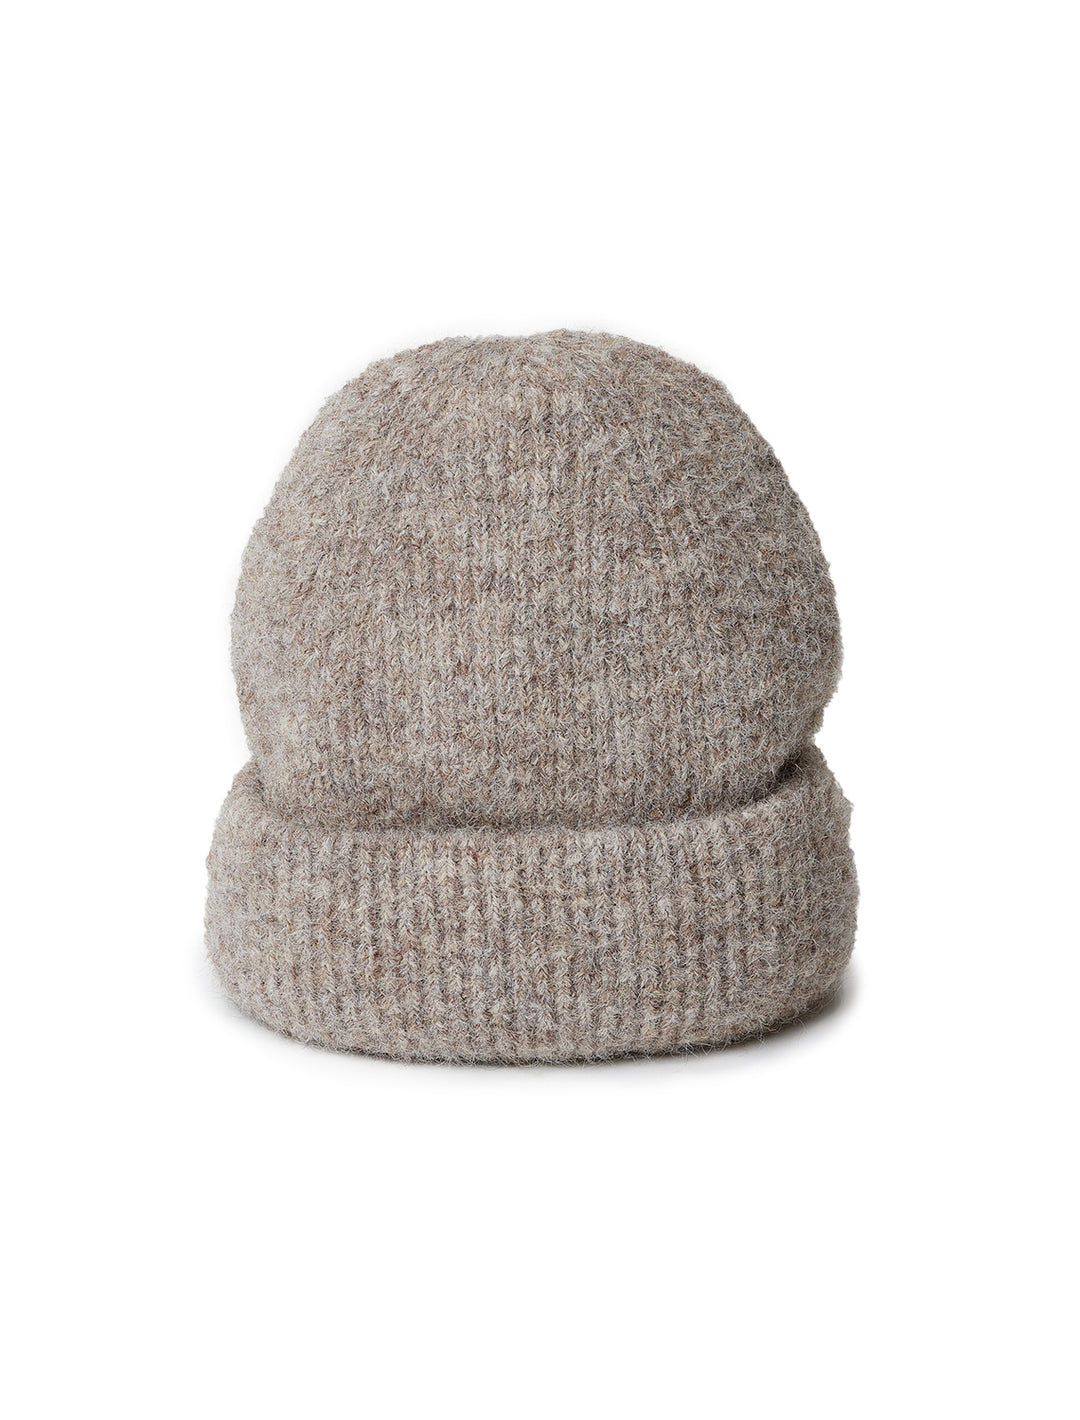 Front view of Hat Attack's eco cuff beanie in taupe.